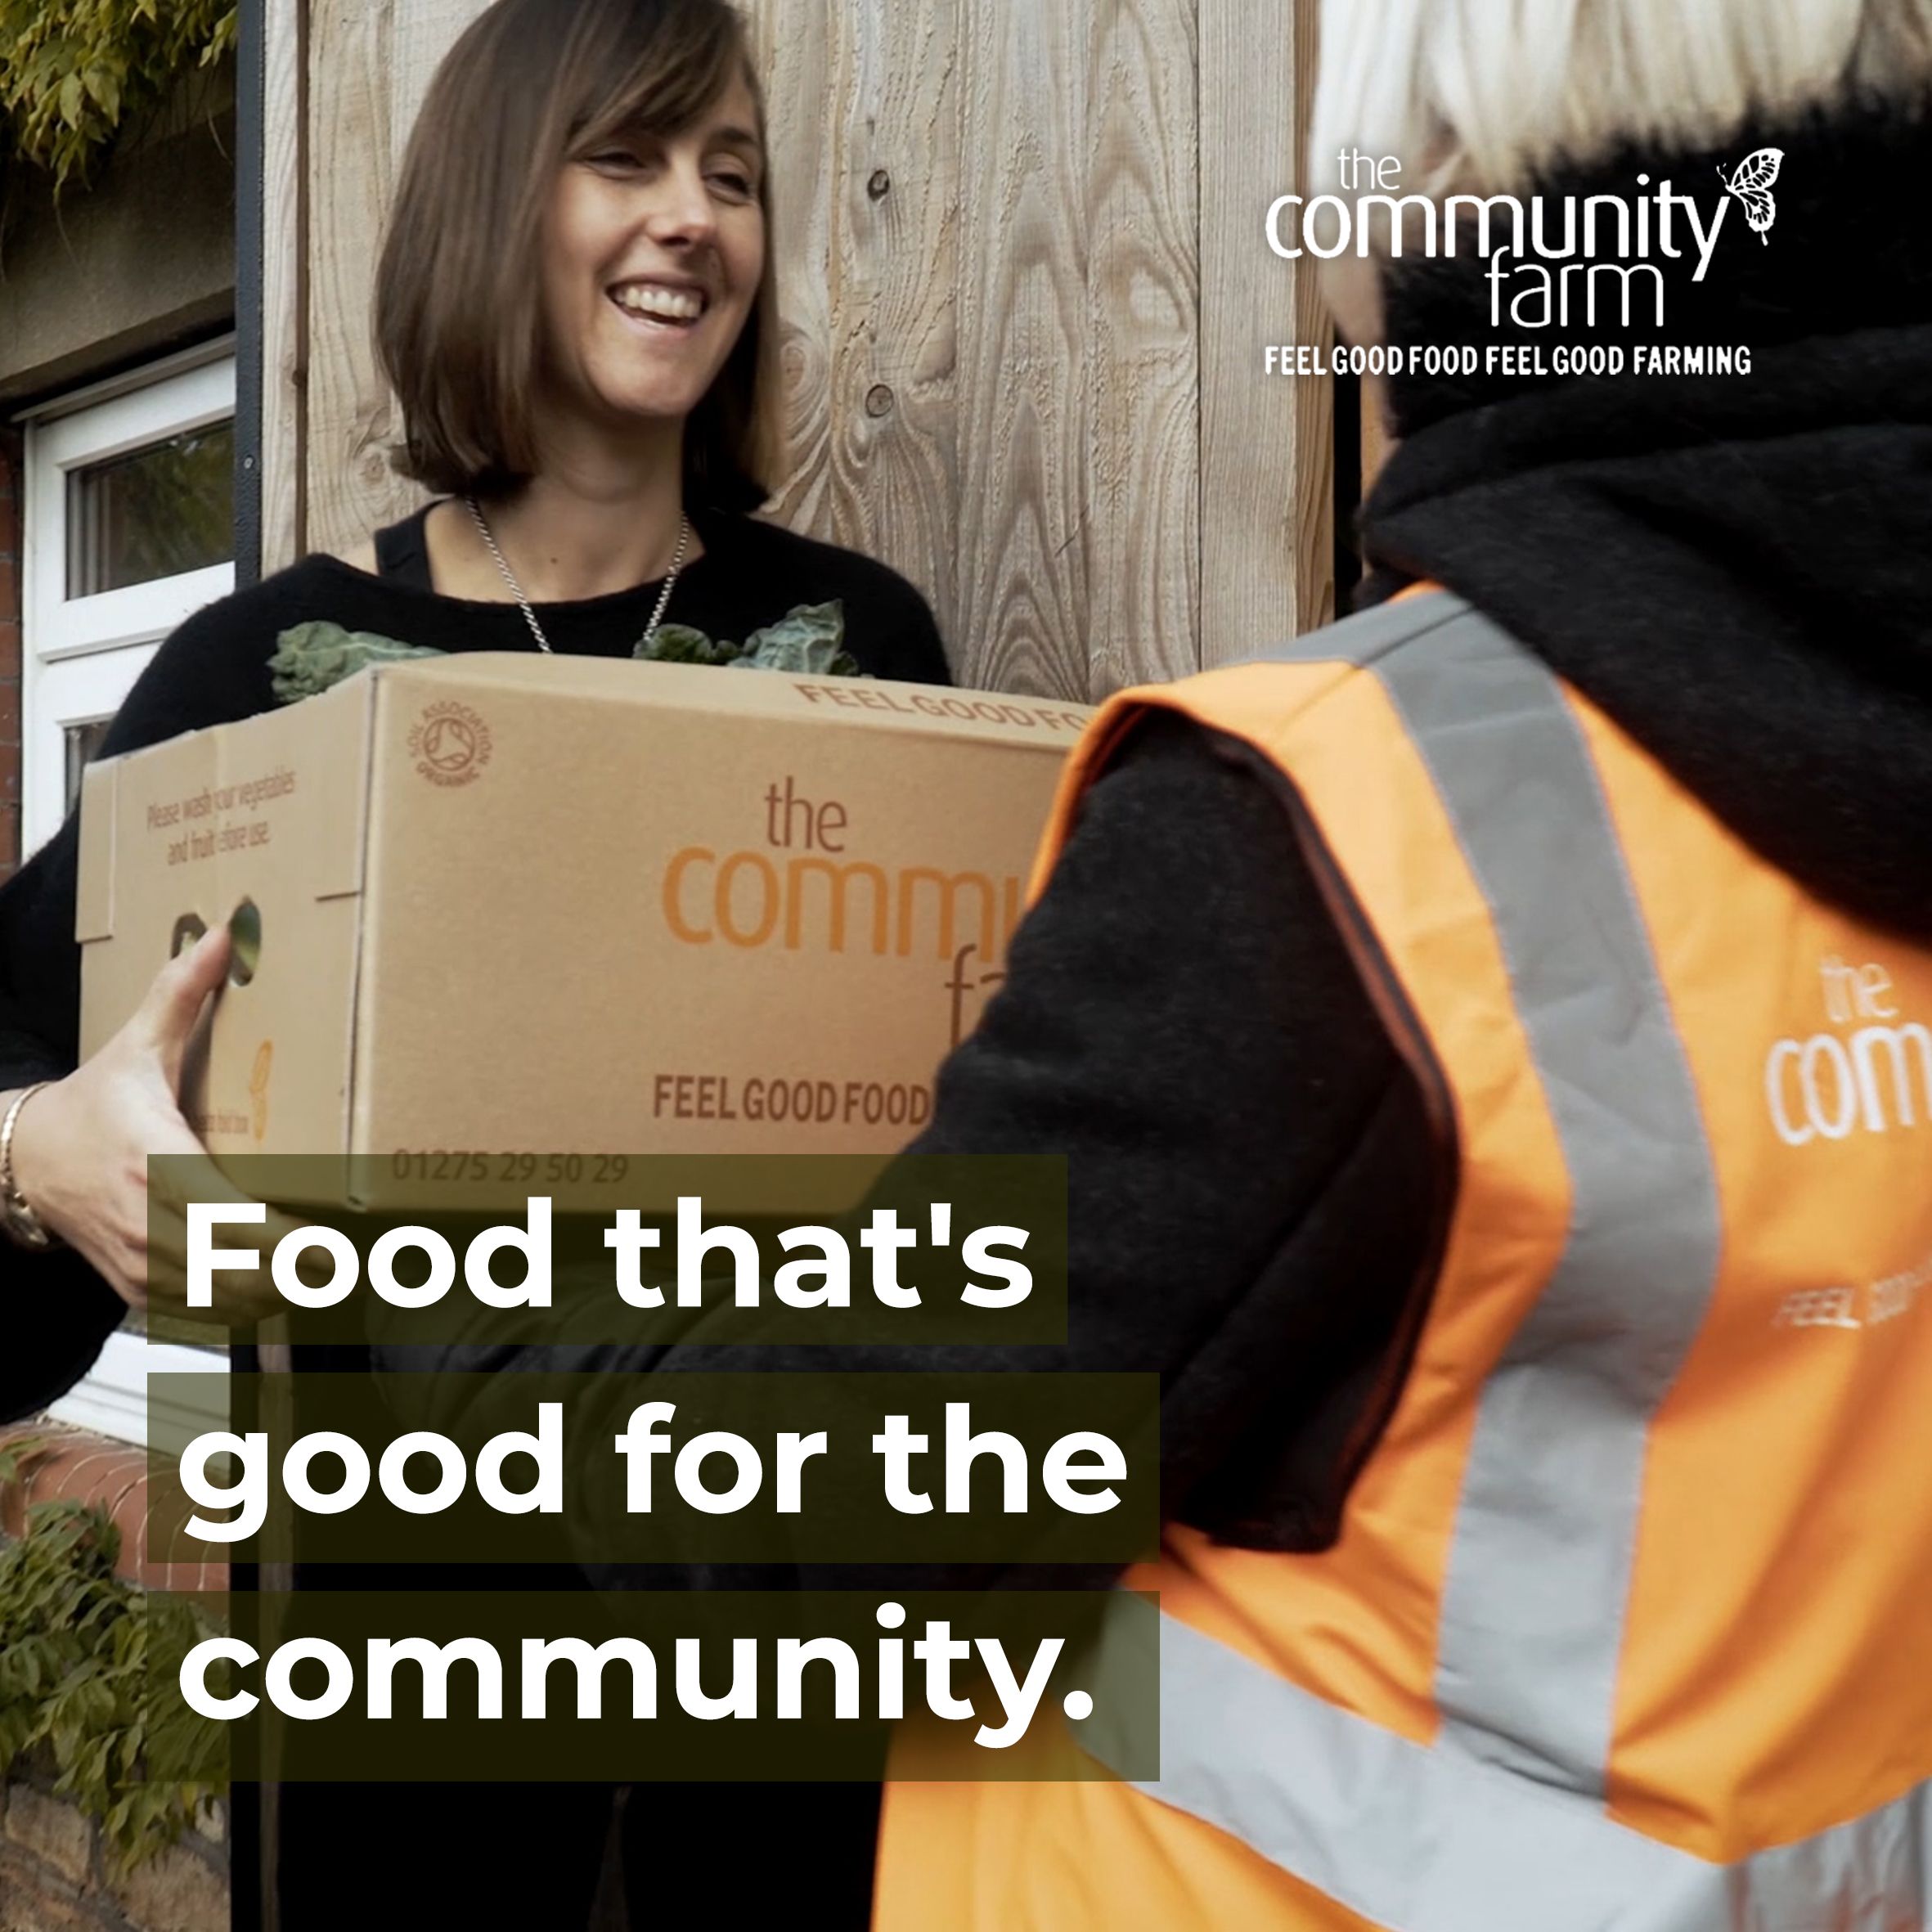 Food that's good for the community